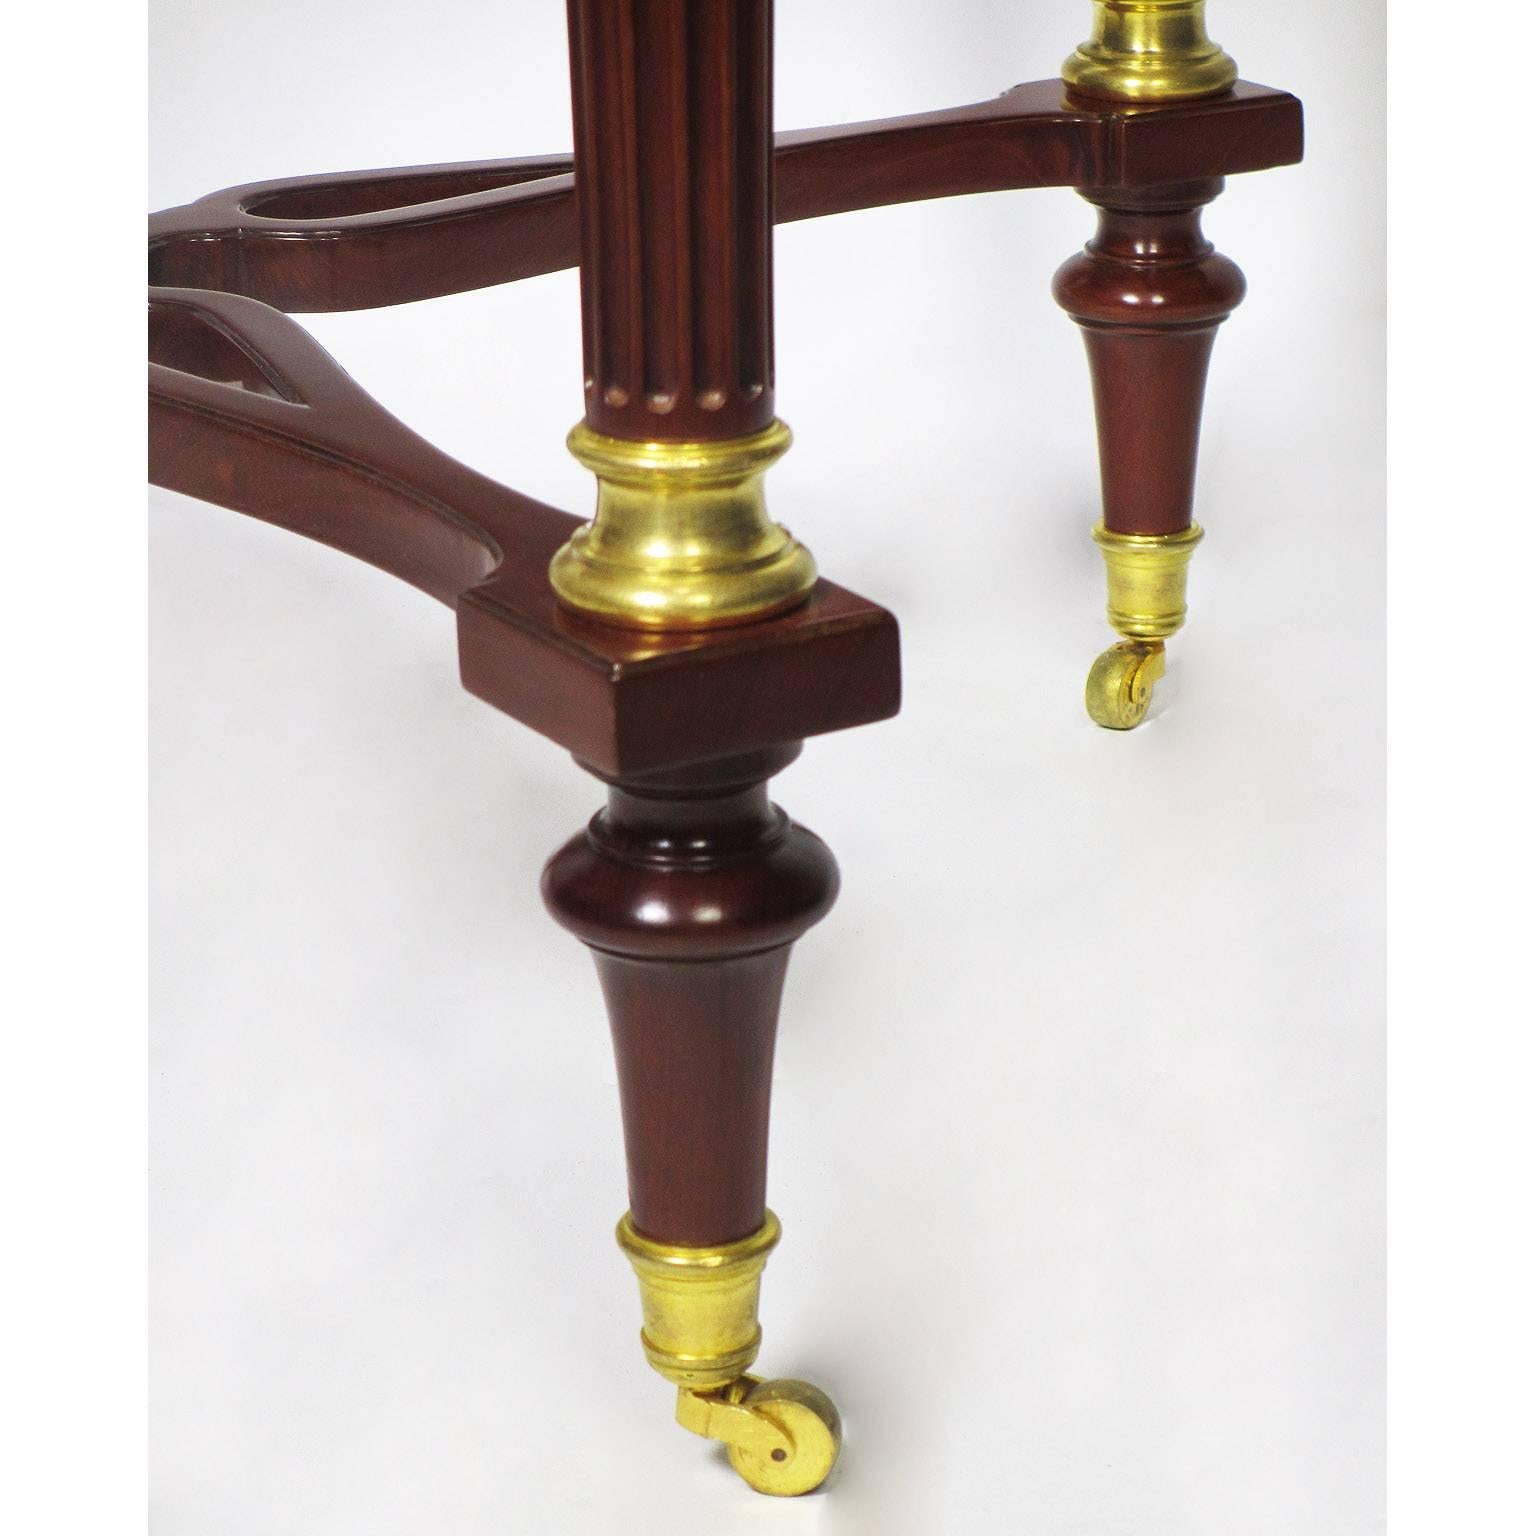 Early 20th Century French 19th-20th Century Louis XVI Style Mahogany Gueridon by Maison Jansen For Sale